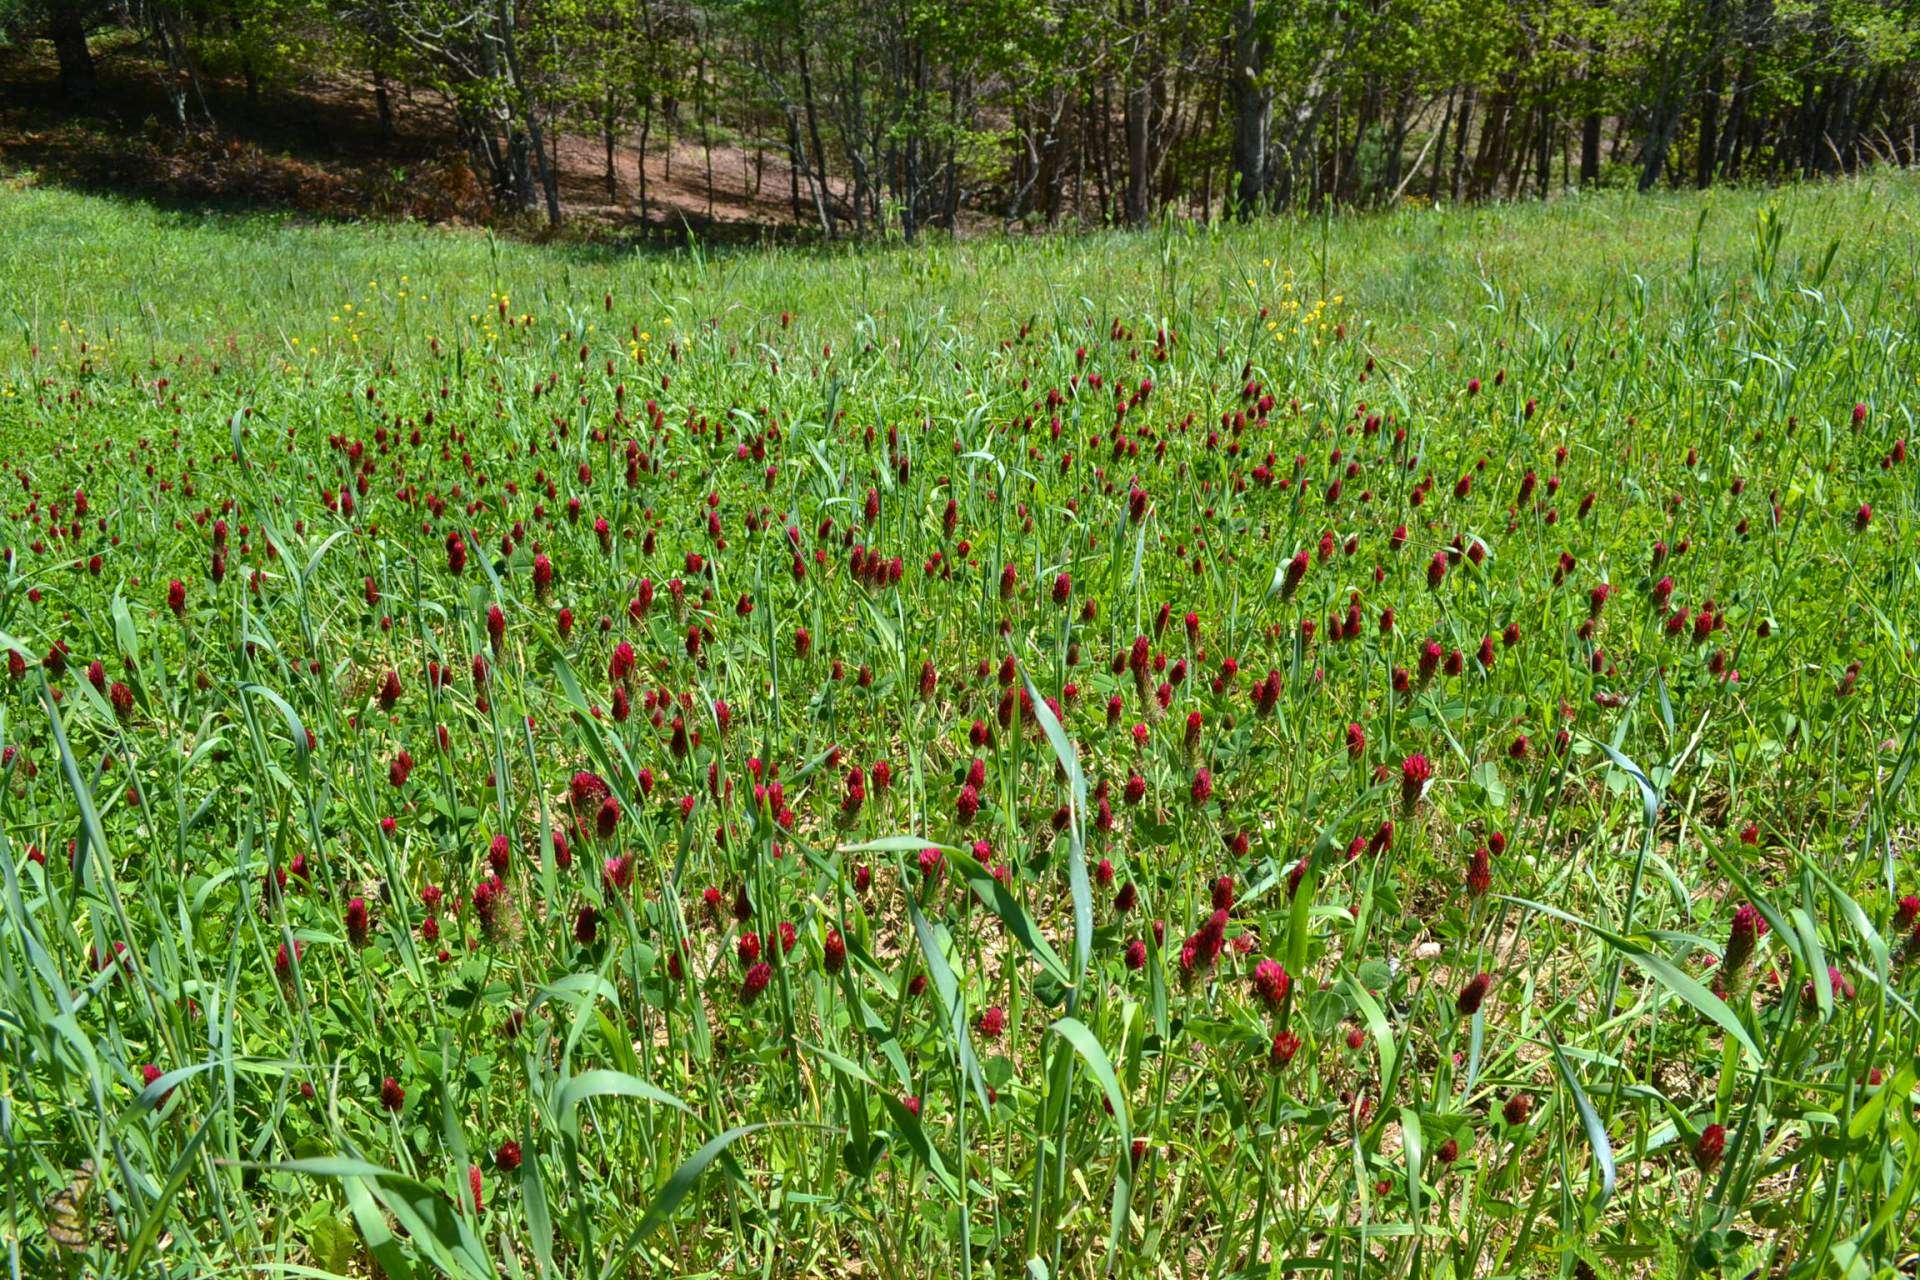 You will also find lots of red topped clover, which we understand is another favorite food for deer and used in many herbal remedies.